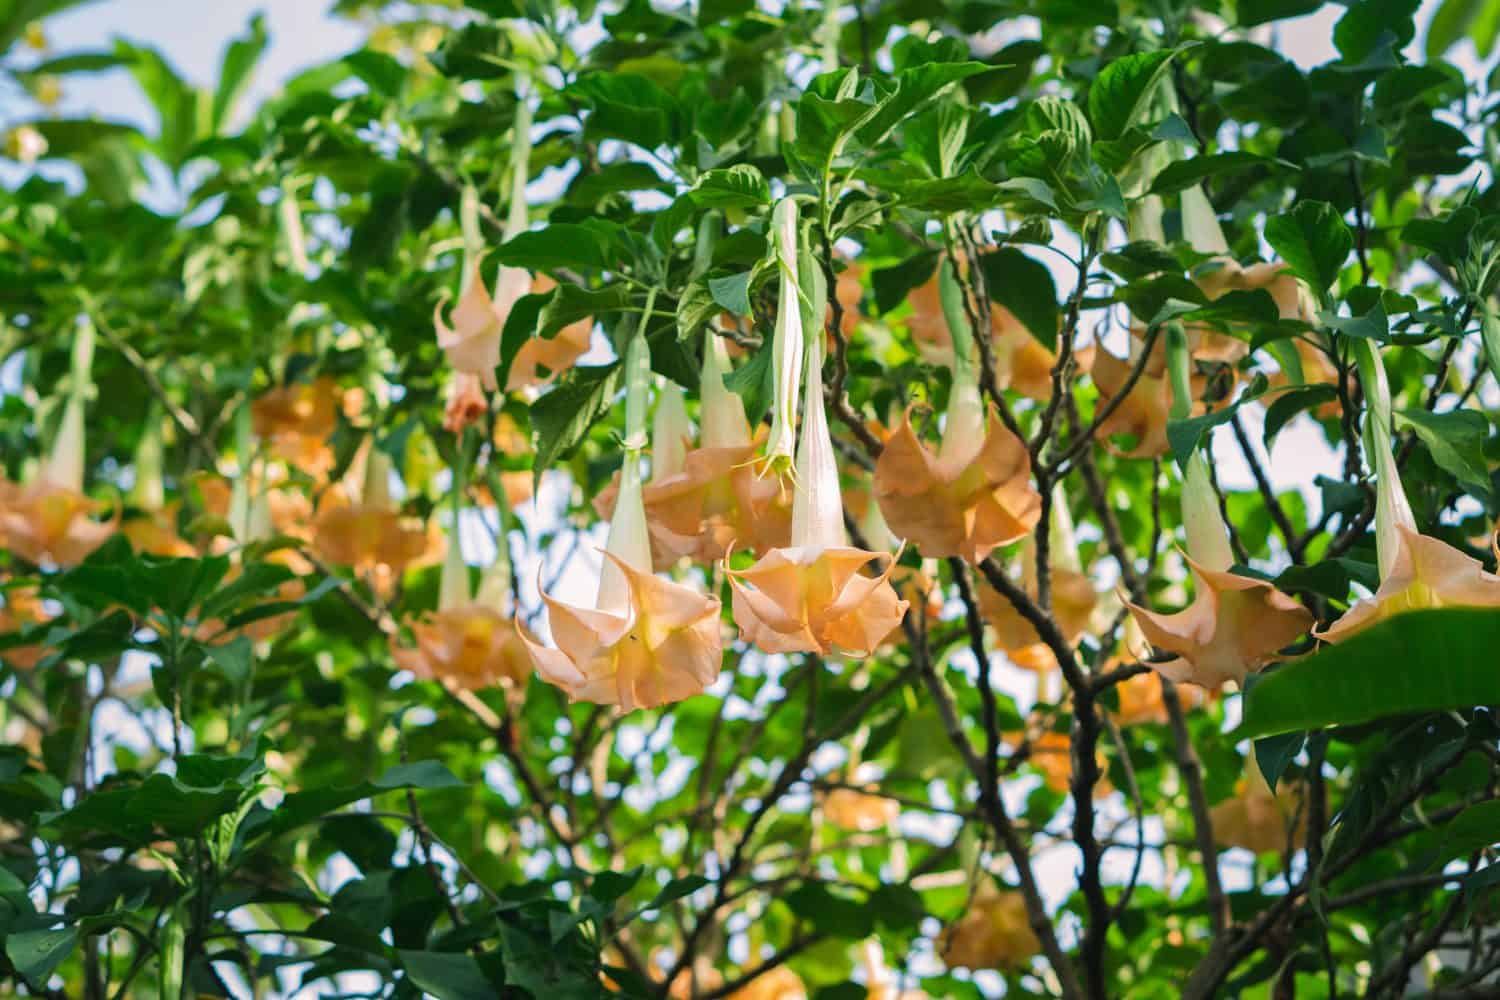 Brugmansia Arborea flowers or Angles Trumpet flower on a sunny day